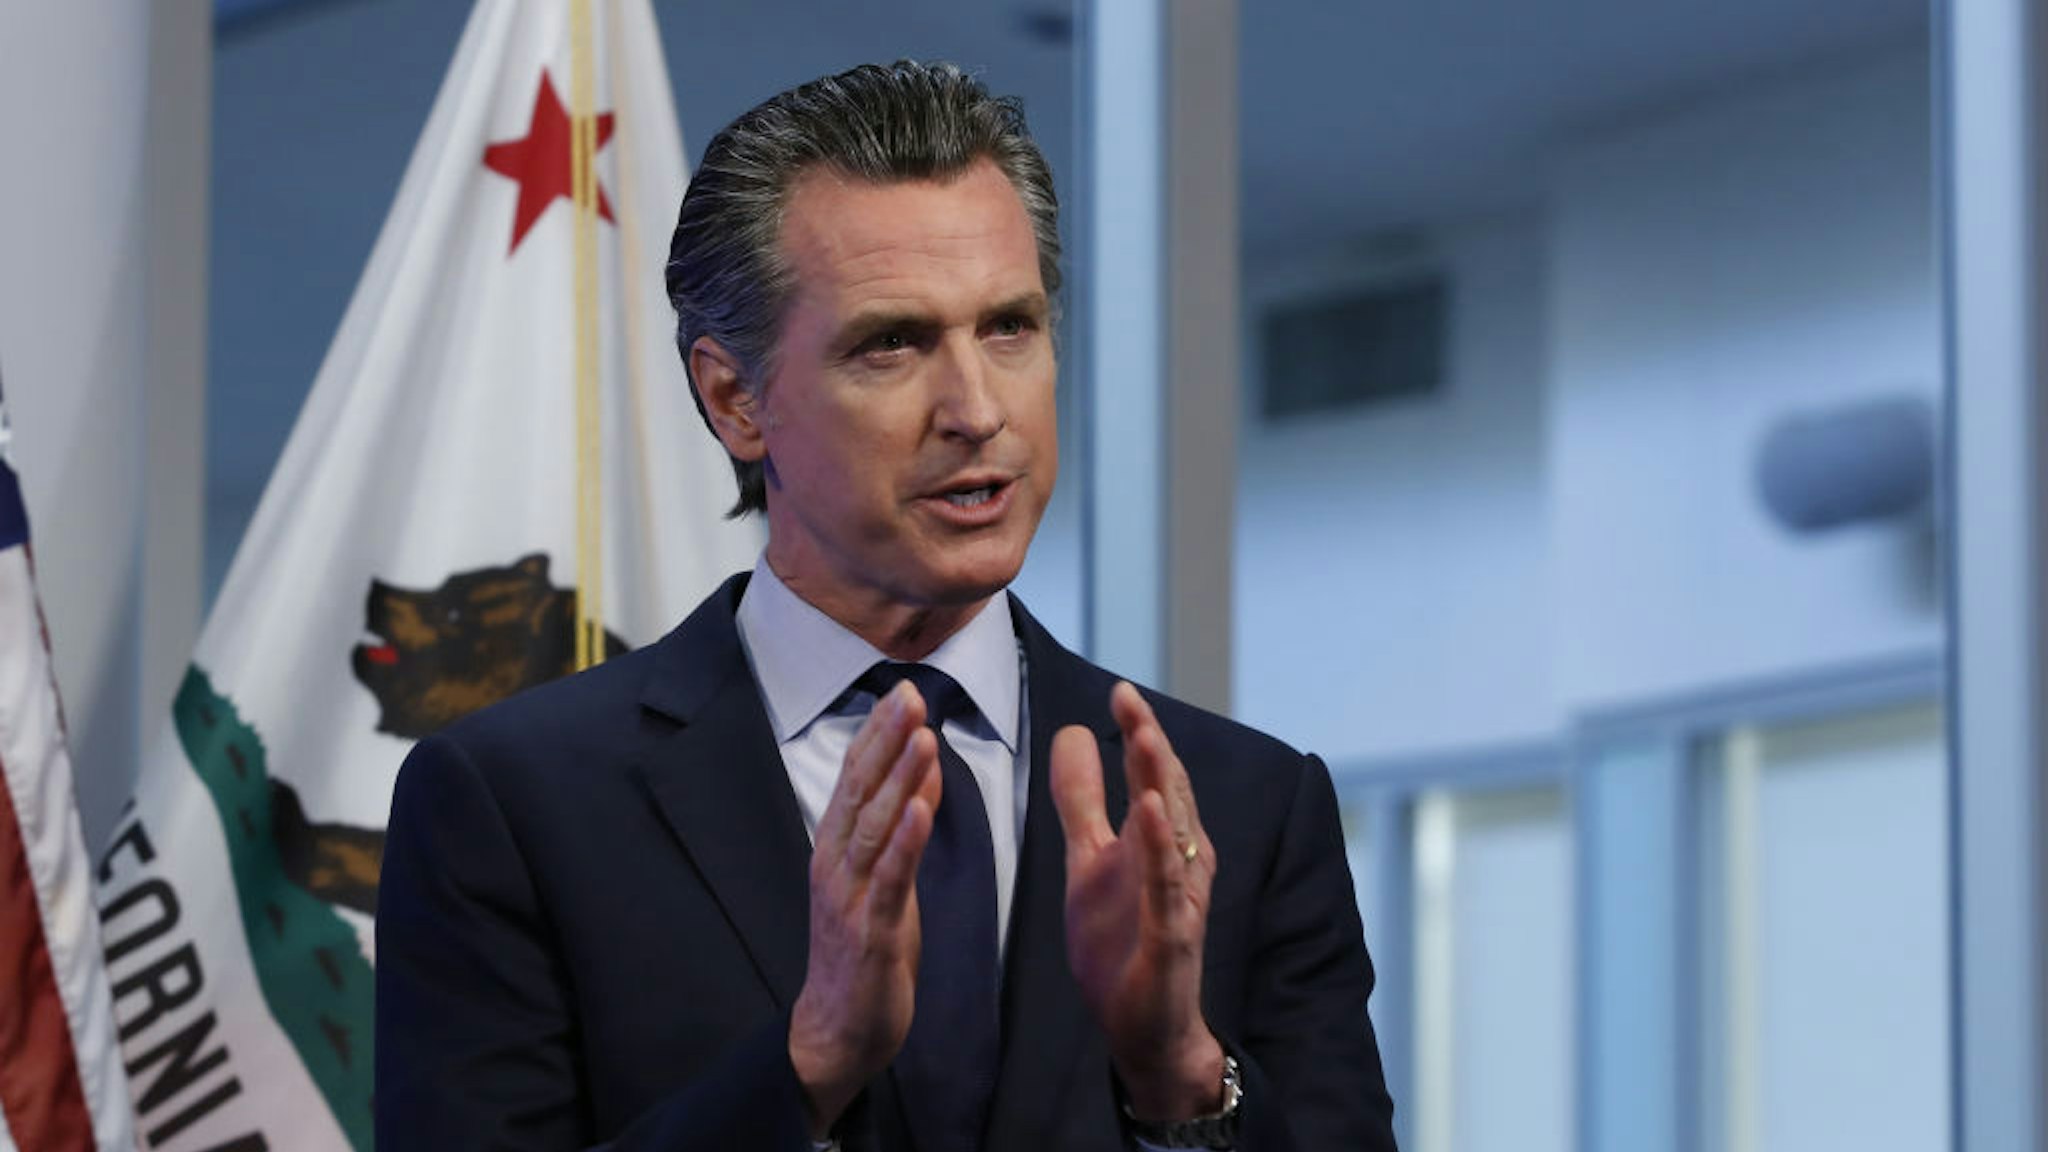 Gavin Newsom, governor of California, speaks during a news conference in Sacramento, California, U.S., on Tuesday, April 14, 2020. Newsom outlined his plan to lift restrictions in the most-populous U.S. state, saying a reopening depends on meeting a series of benchmarks that would remake daily life for 40 million residents. Photographer: Rich Pedroncelli/AP/Bloomberg